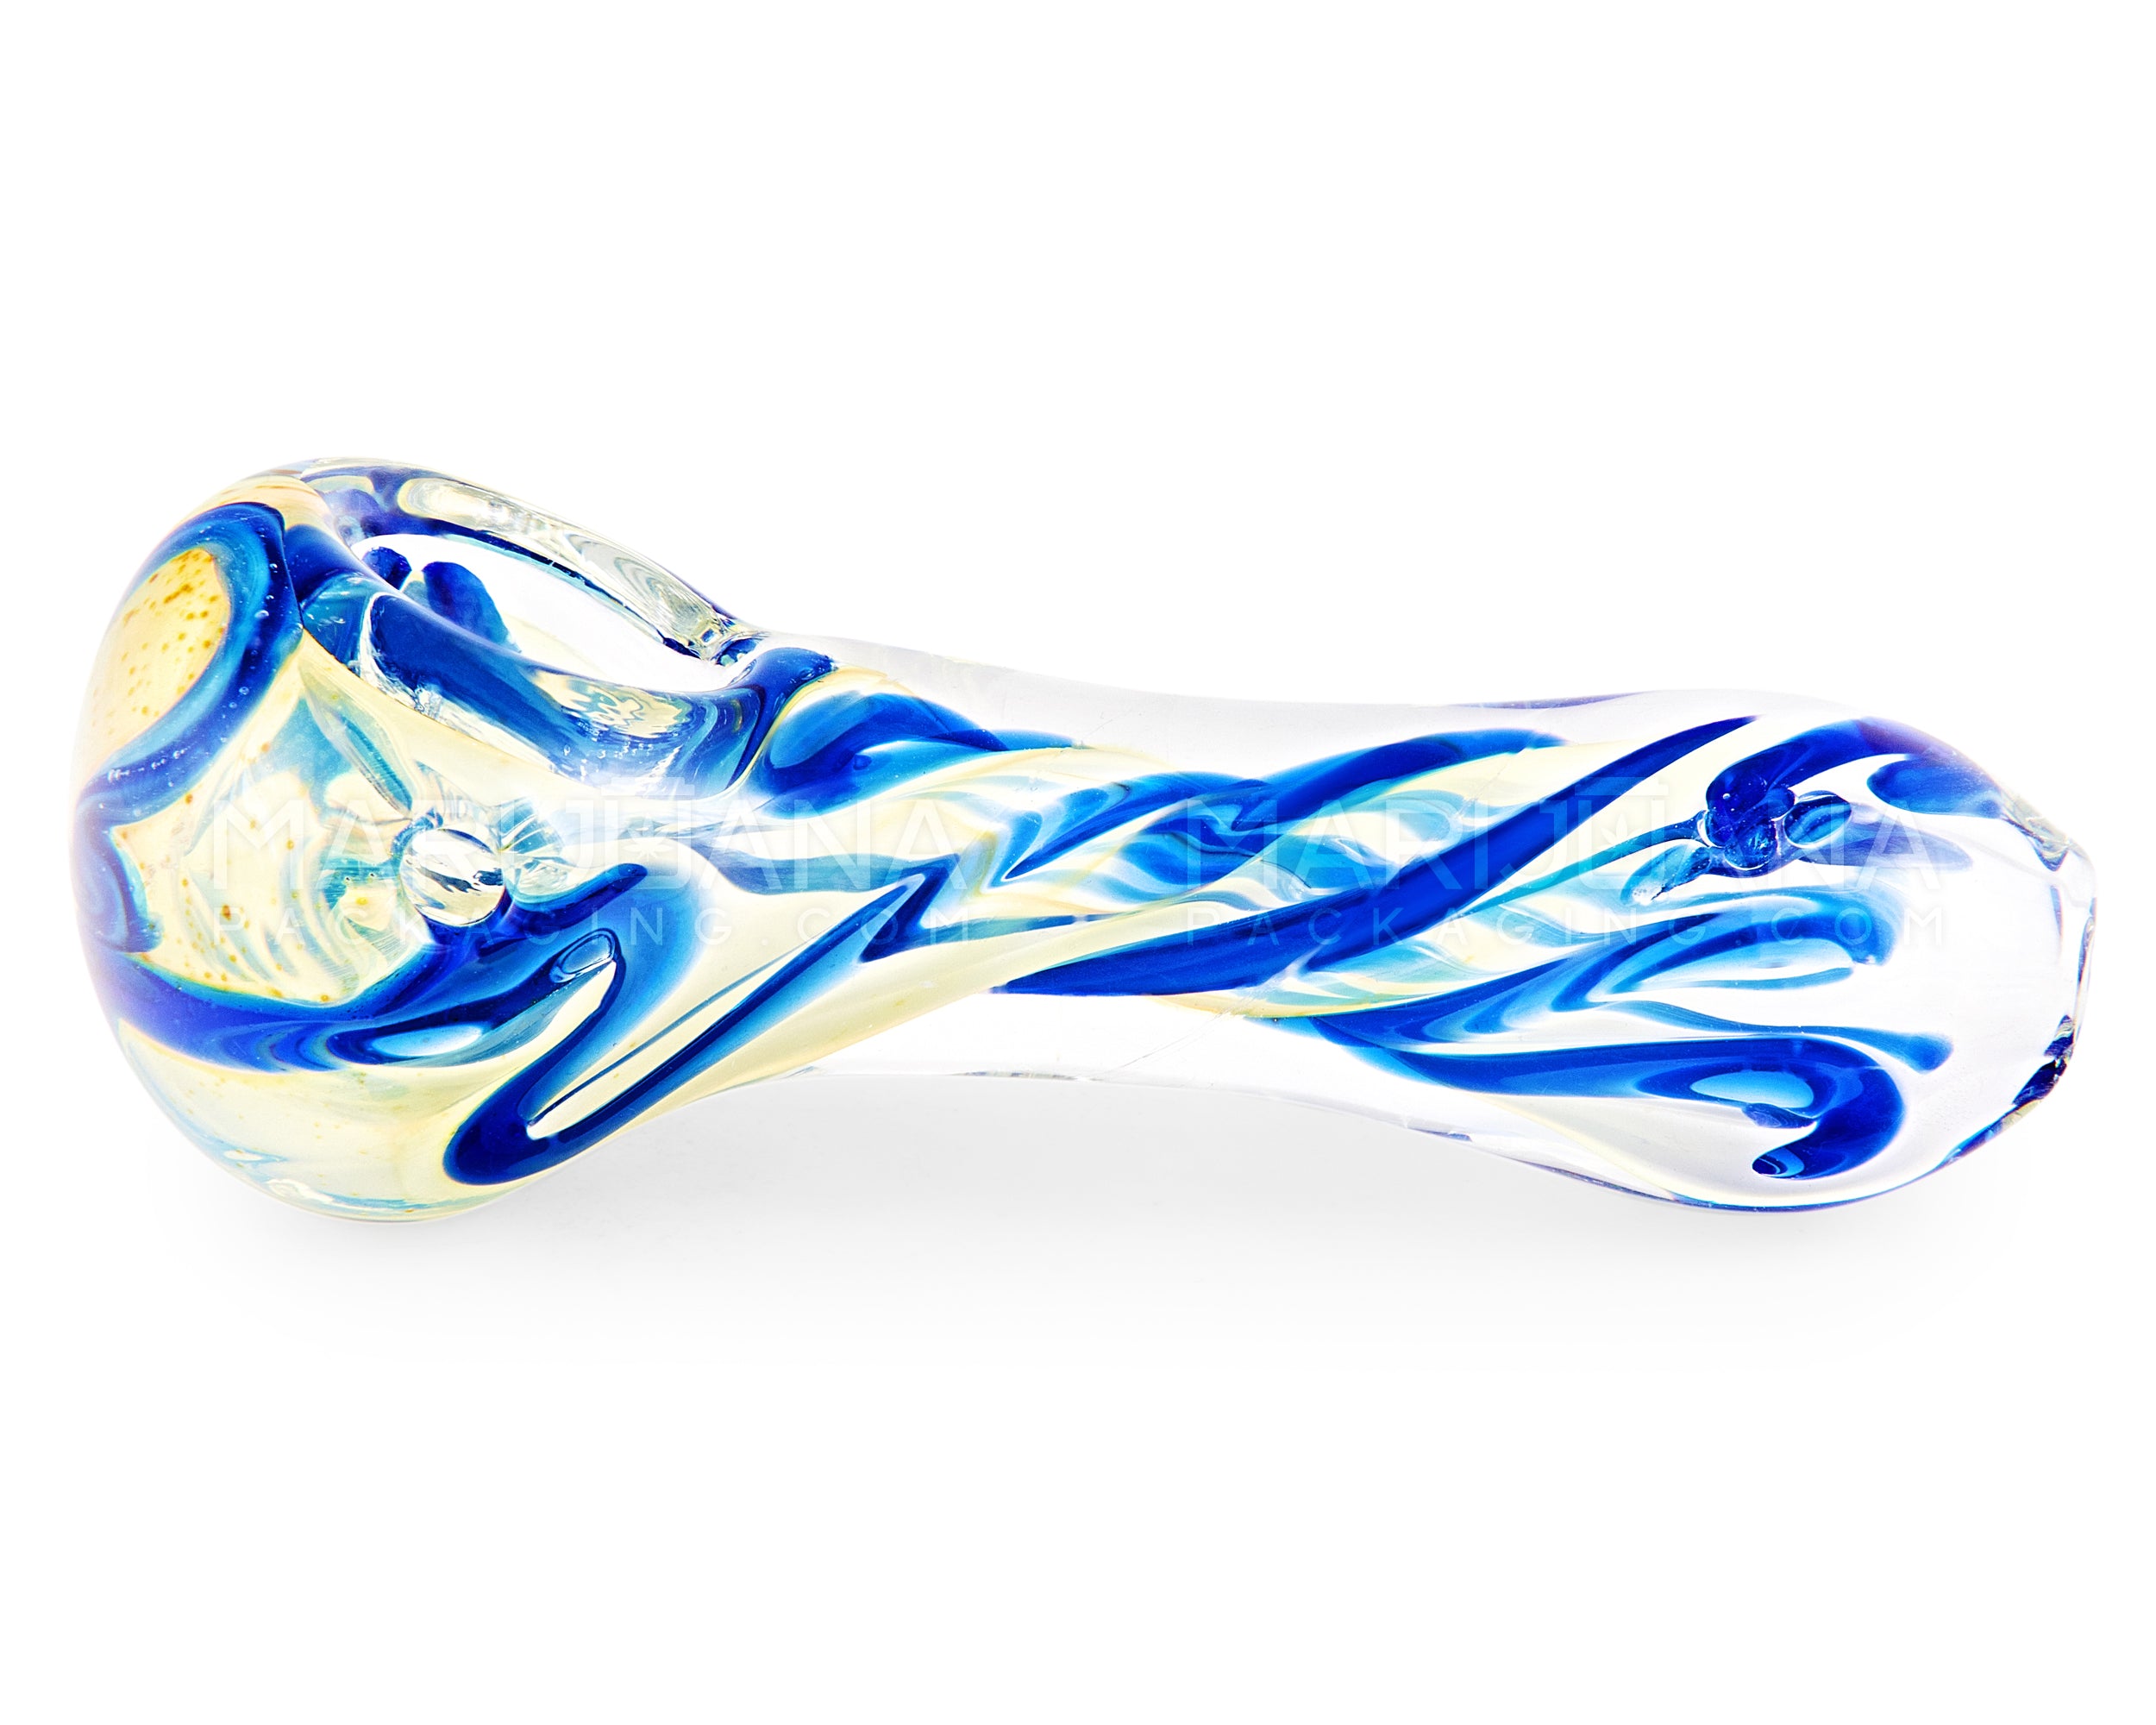 Spiral & Gold Fumed Spoon Hand Pipe | 4in Long - Glass - Assorted - 5